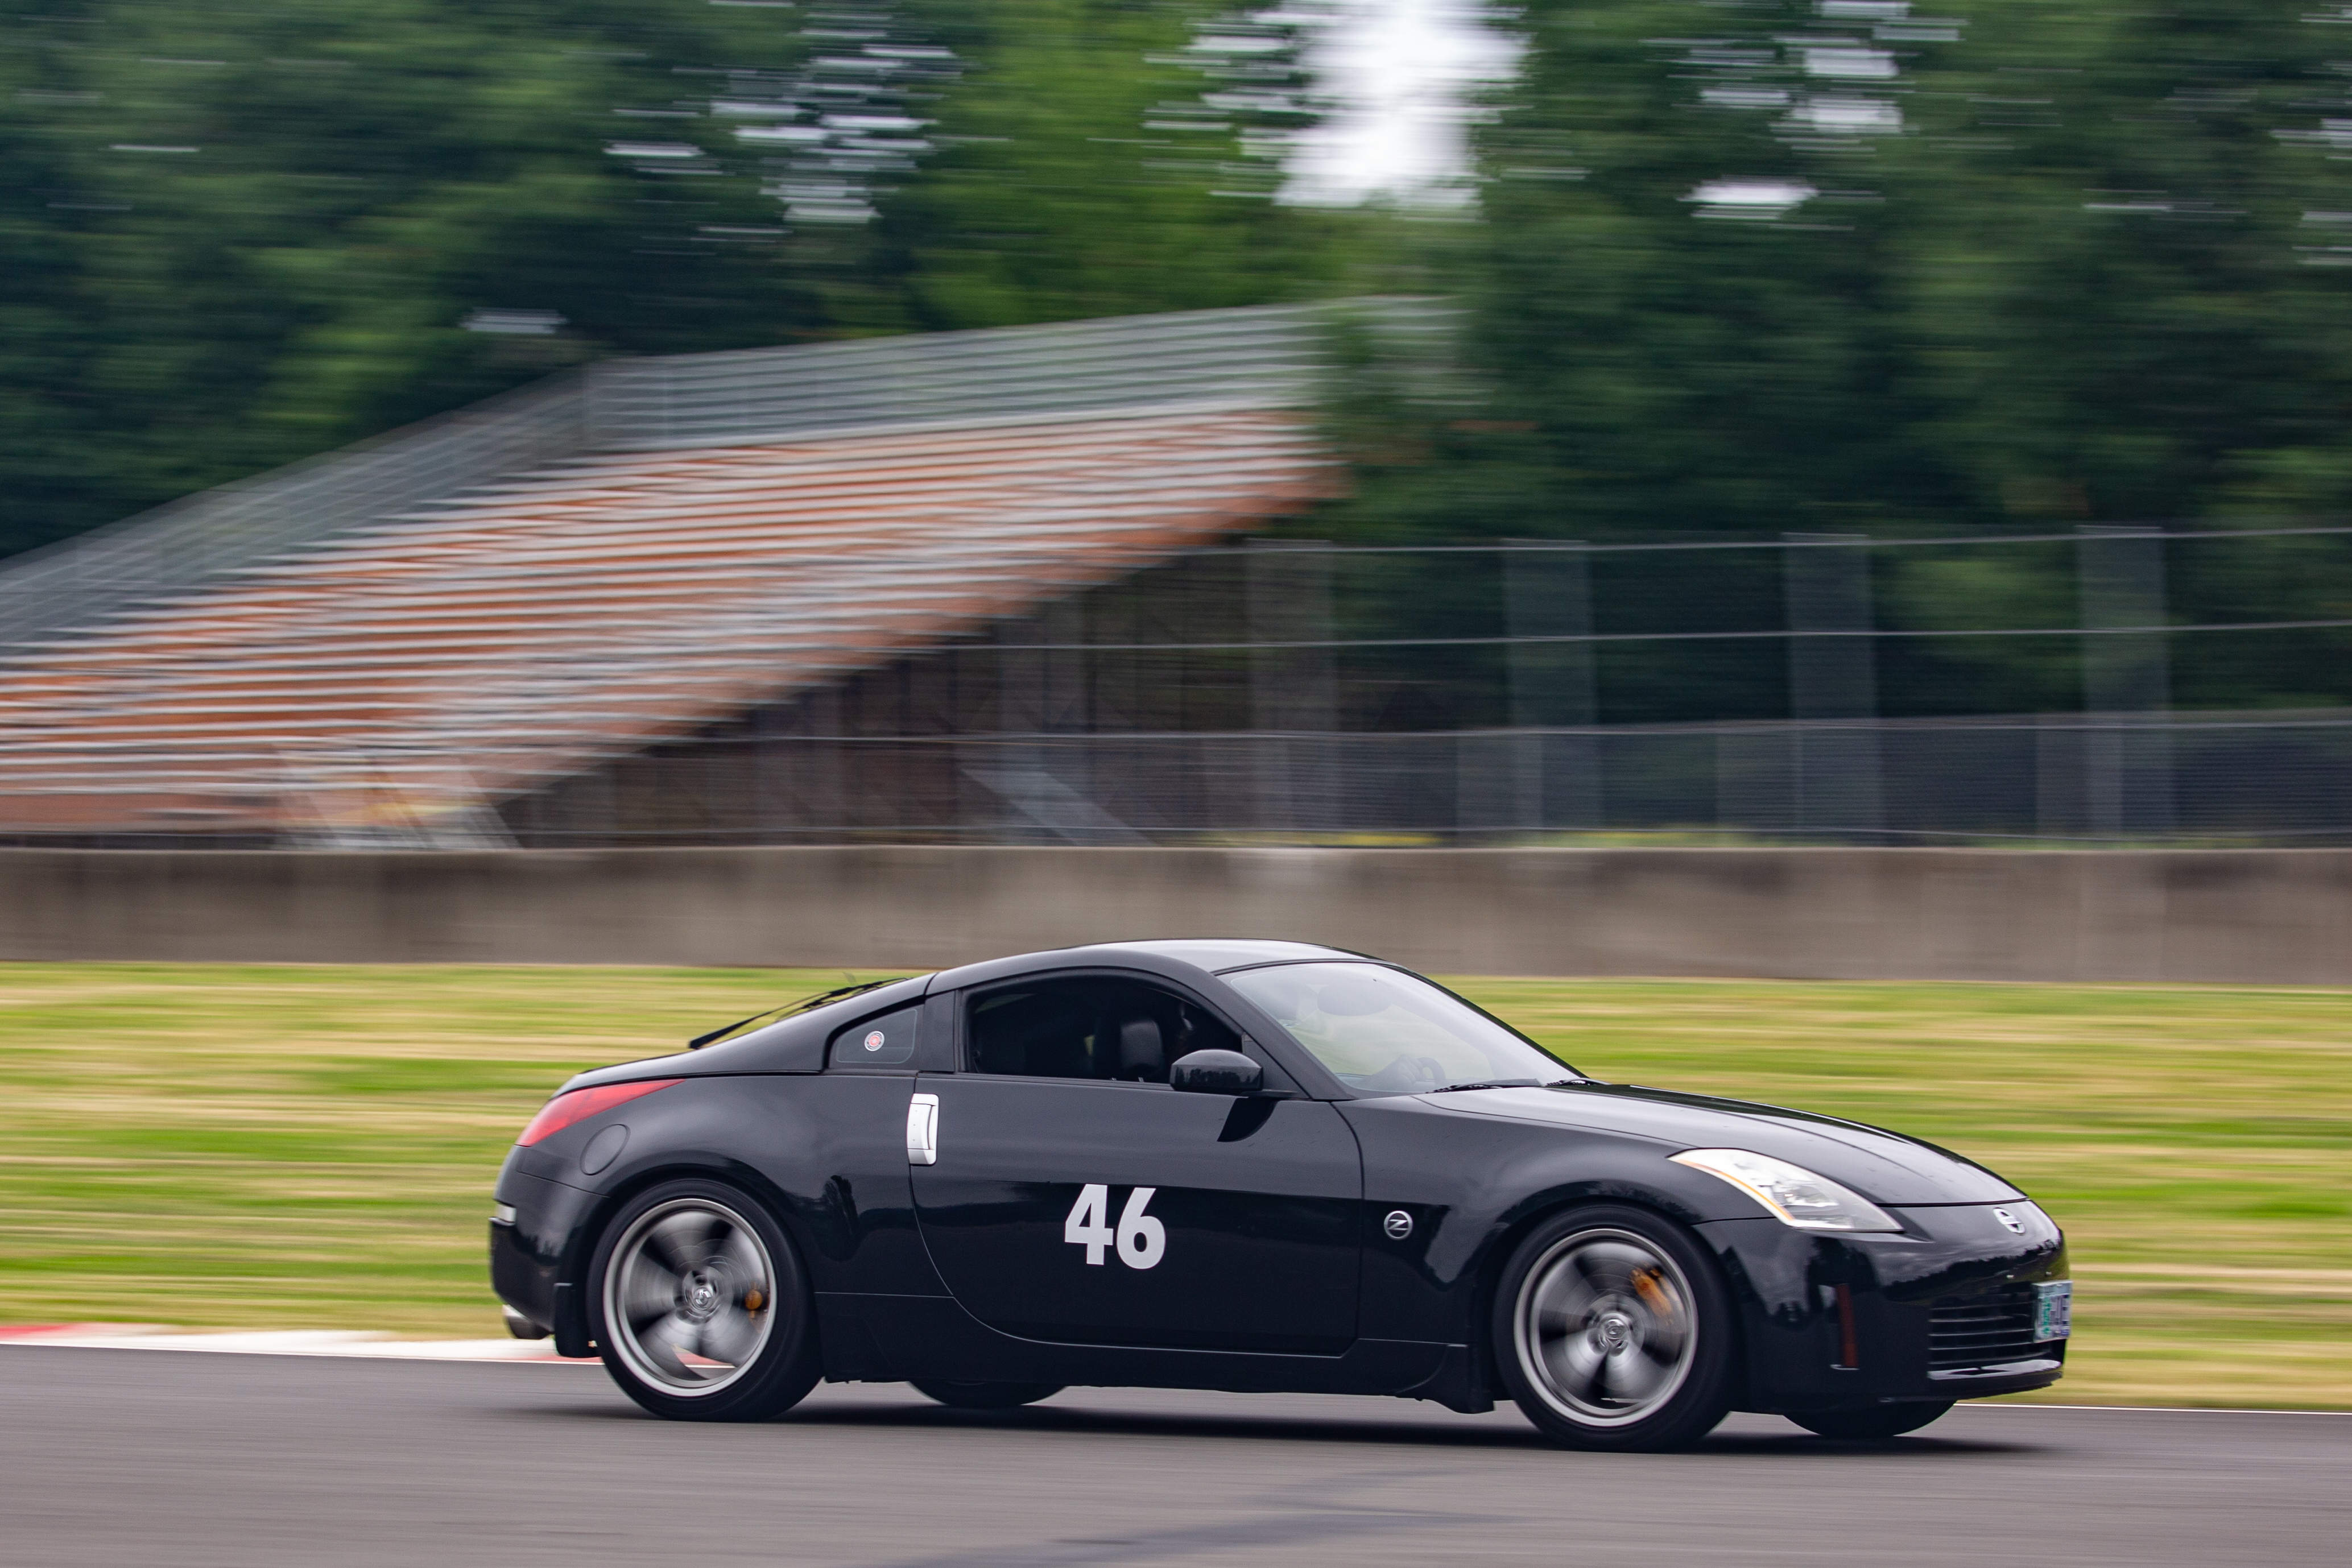 350Z on track with HOD